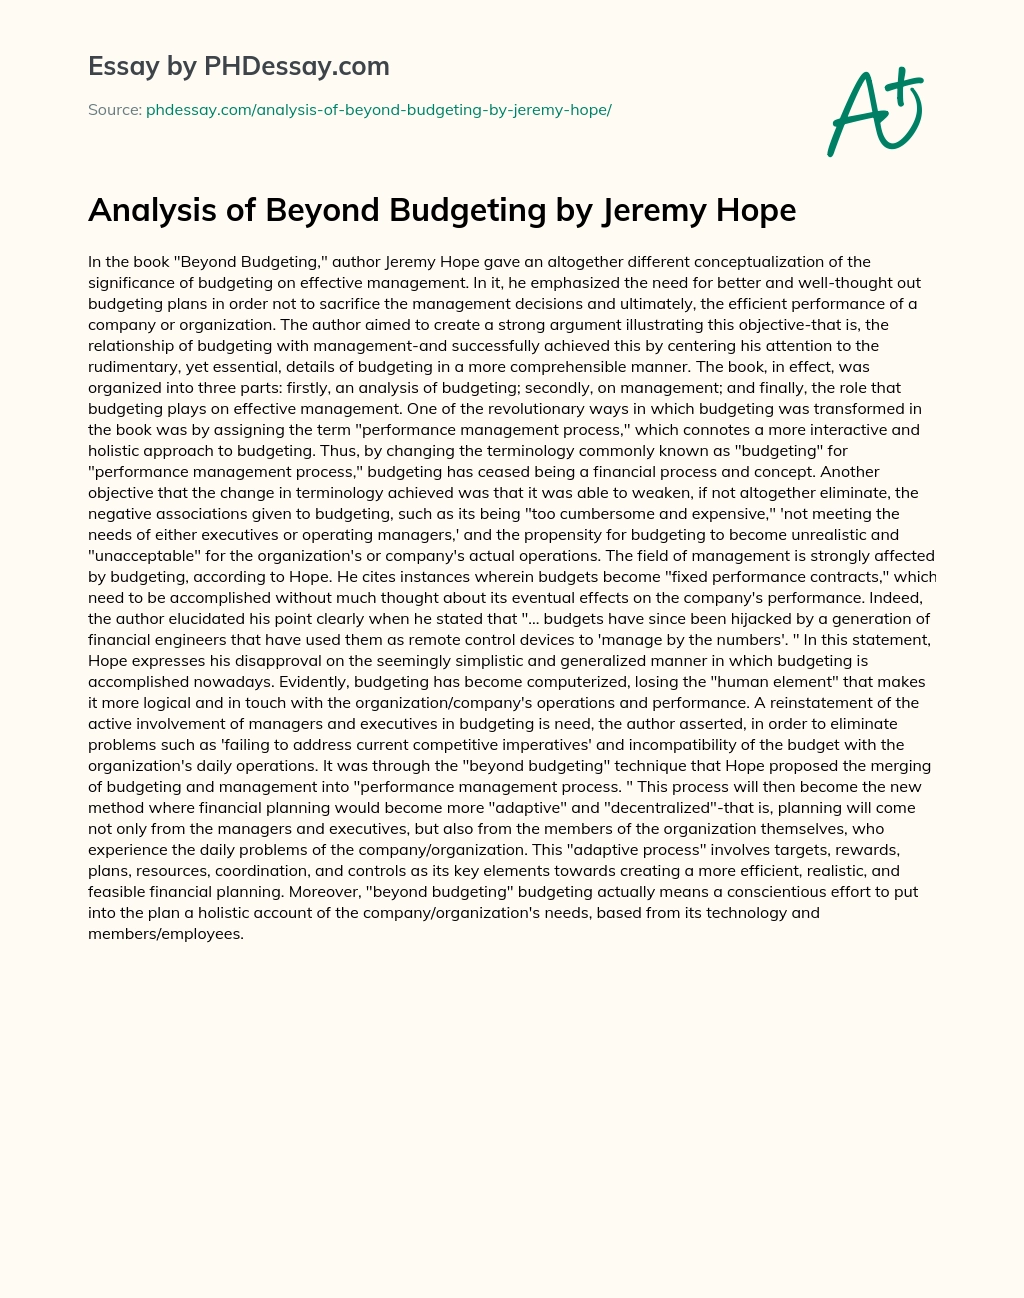 Analysis of Beyond Budgeting by Jeremy Hope essay